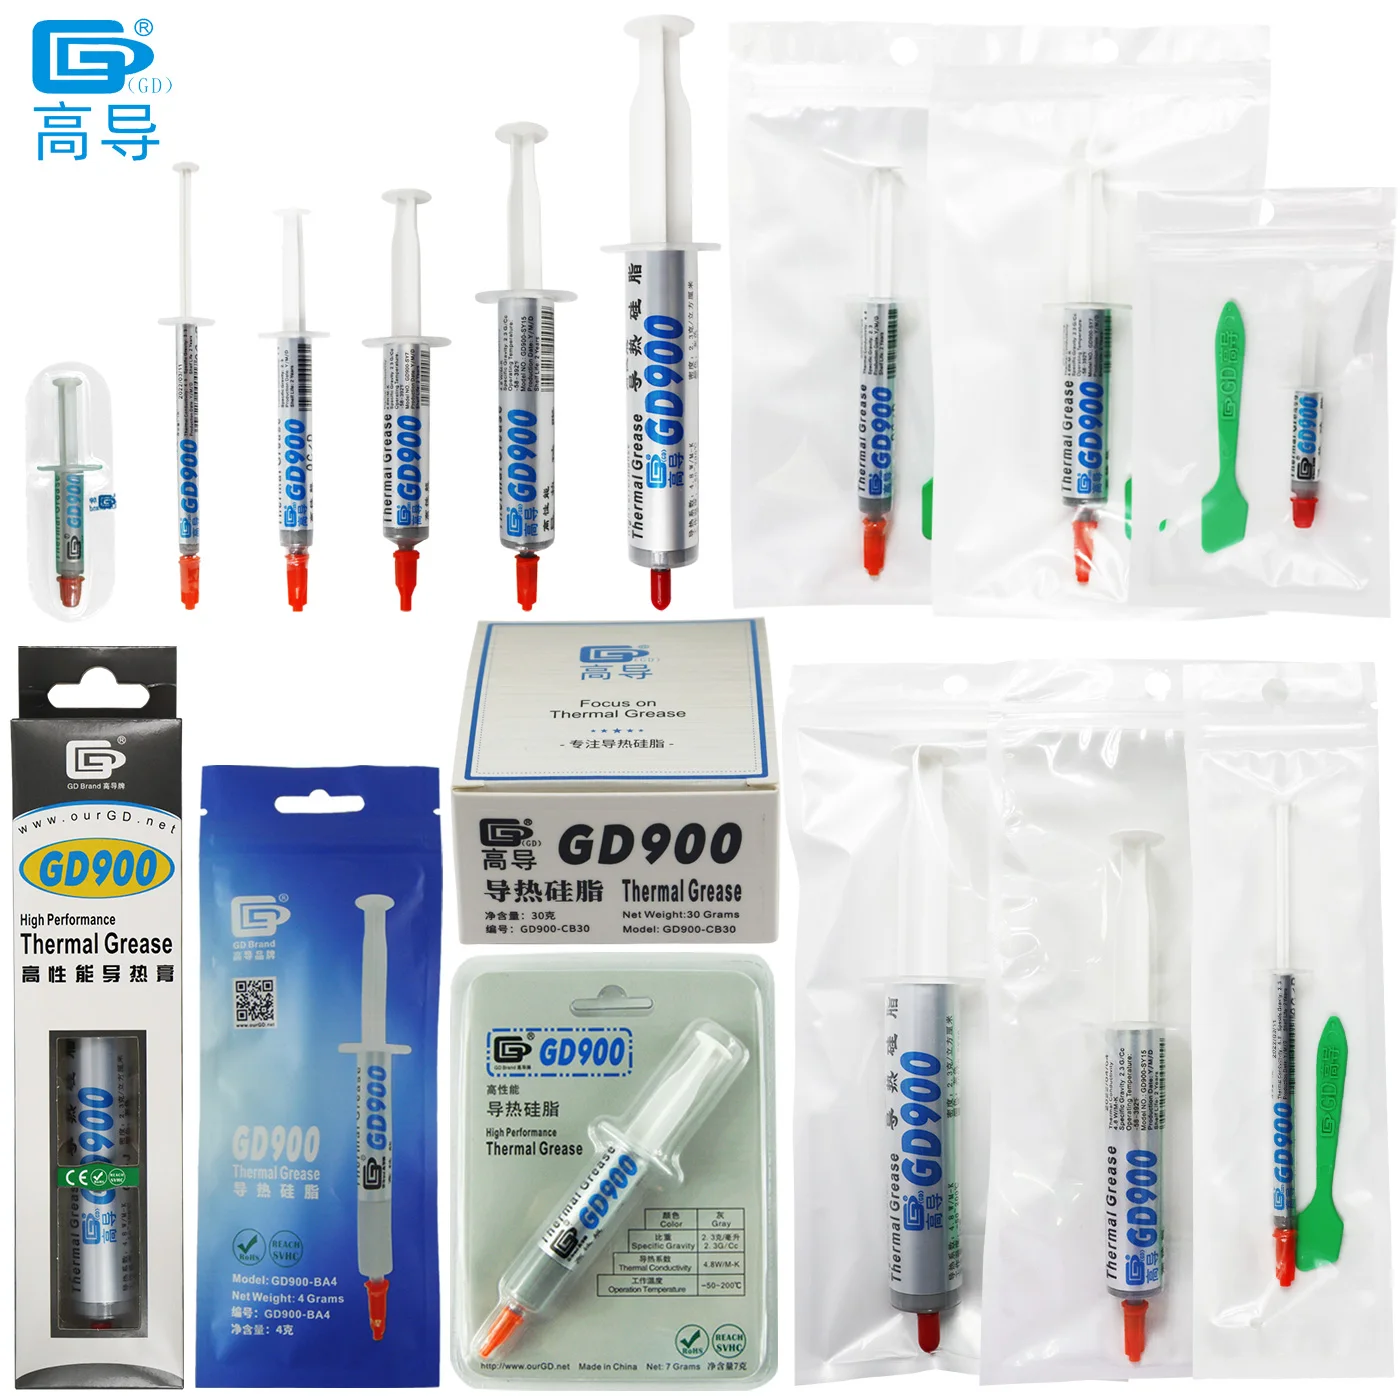 Net Weight 1/3/7/15/30 Grams Gray GD900 Thermal Conductive Grease Paste Plaster Heat Sink Commpound for CPU LED SSY BAS BR BX CB